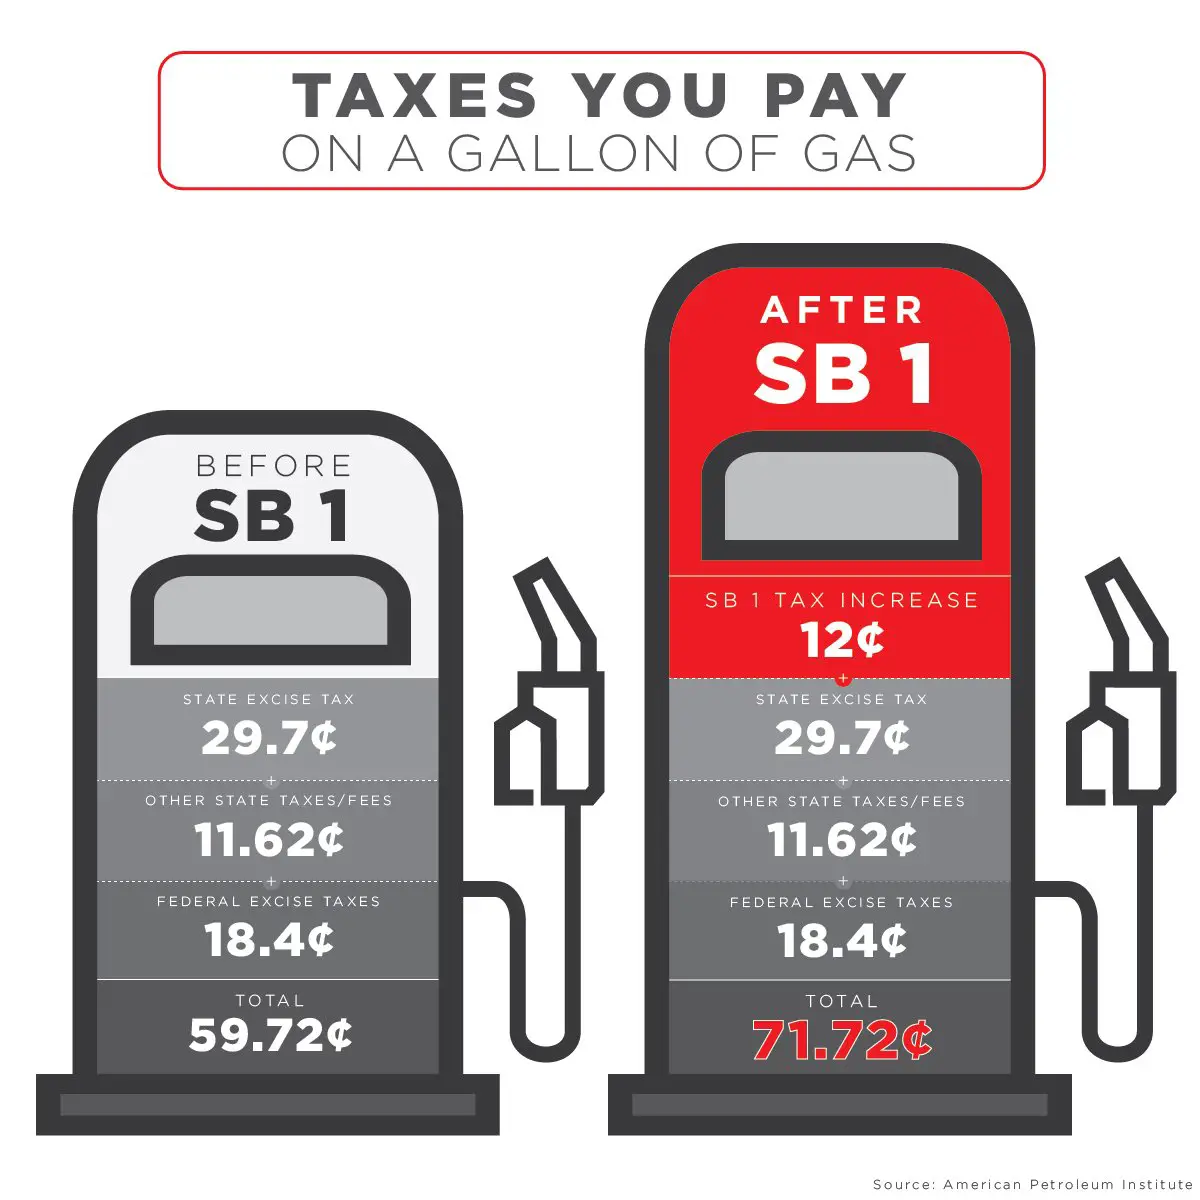 Brian Dahle on Twitter: " Wow! Check out what you pay in gas taxes now ...